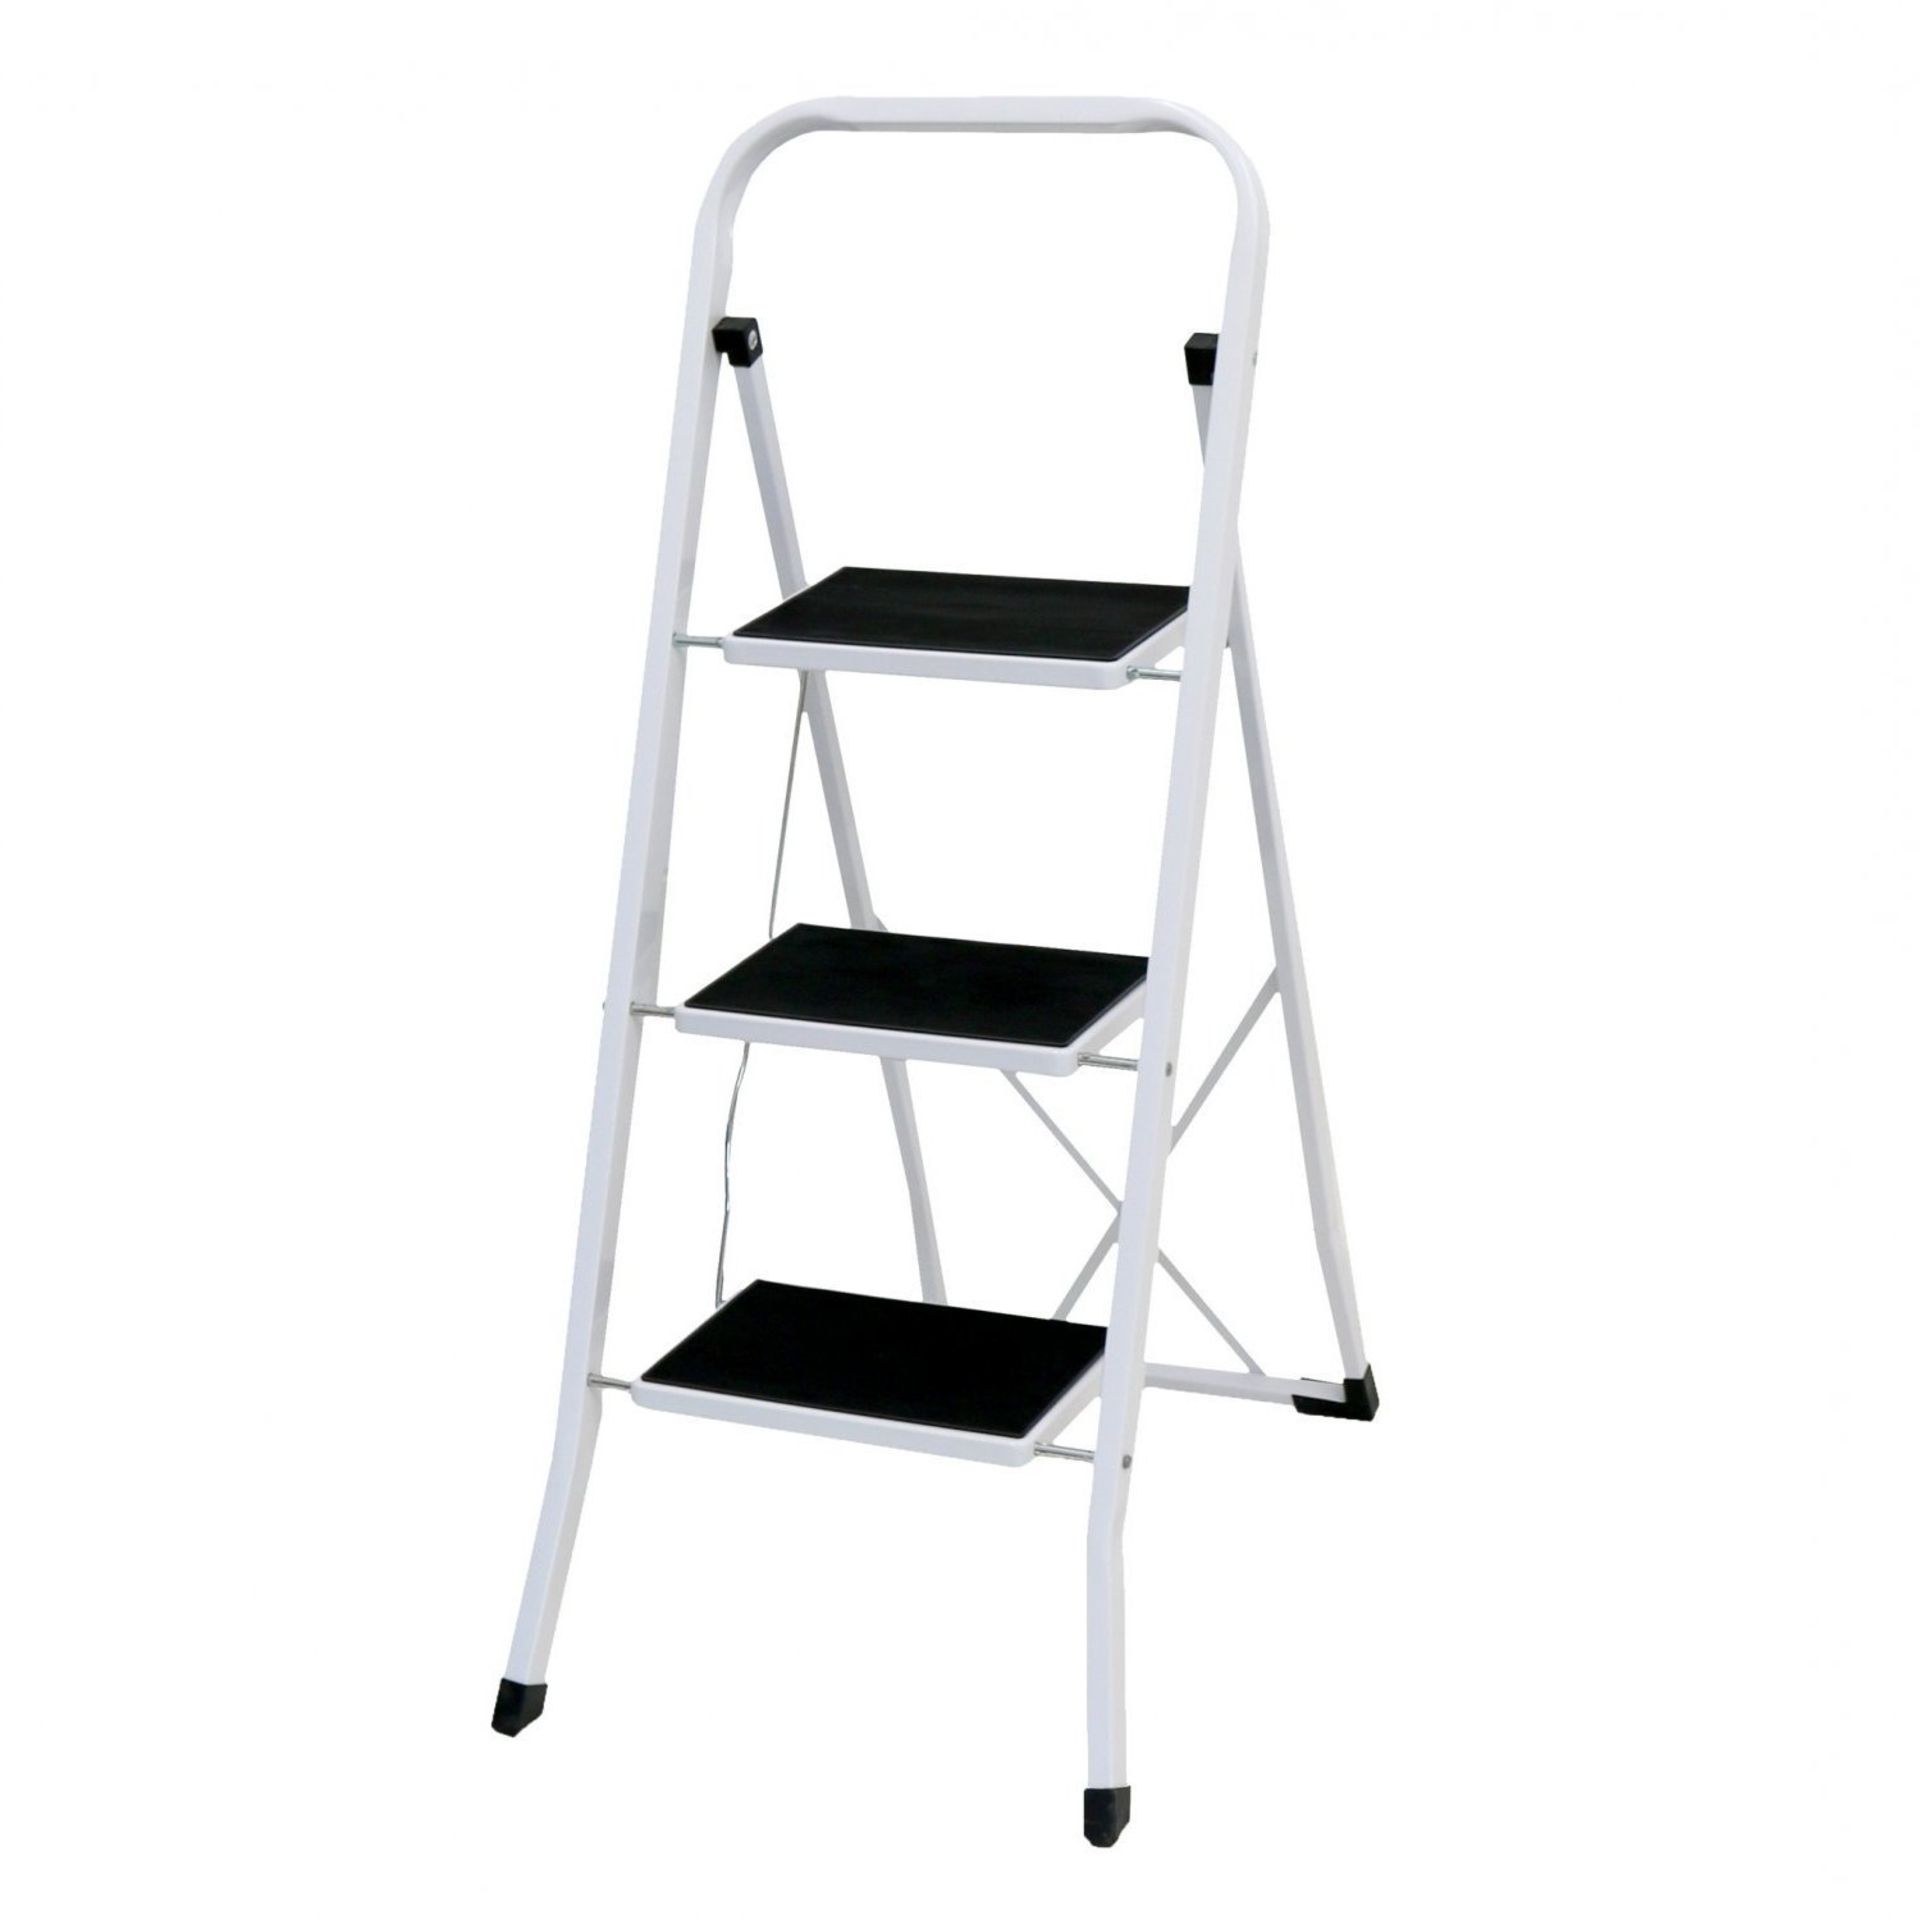 (LF45) Foldable 3 Step Ladder Stepladder Non Slip Tread Safety Steel The Foldable 3 Step Lad... - Image 2 of 2